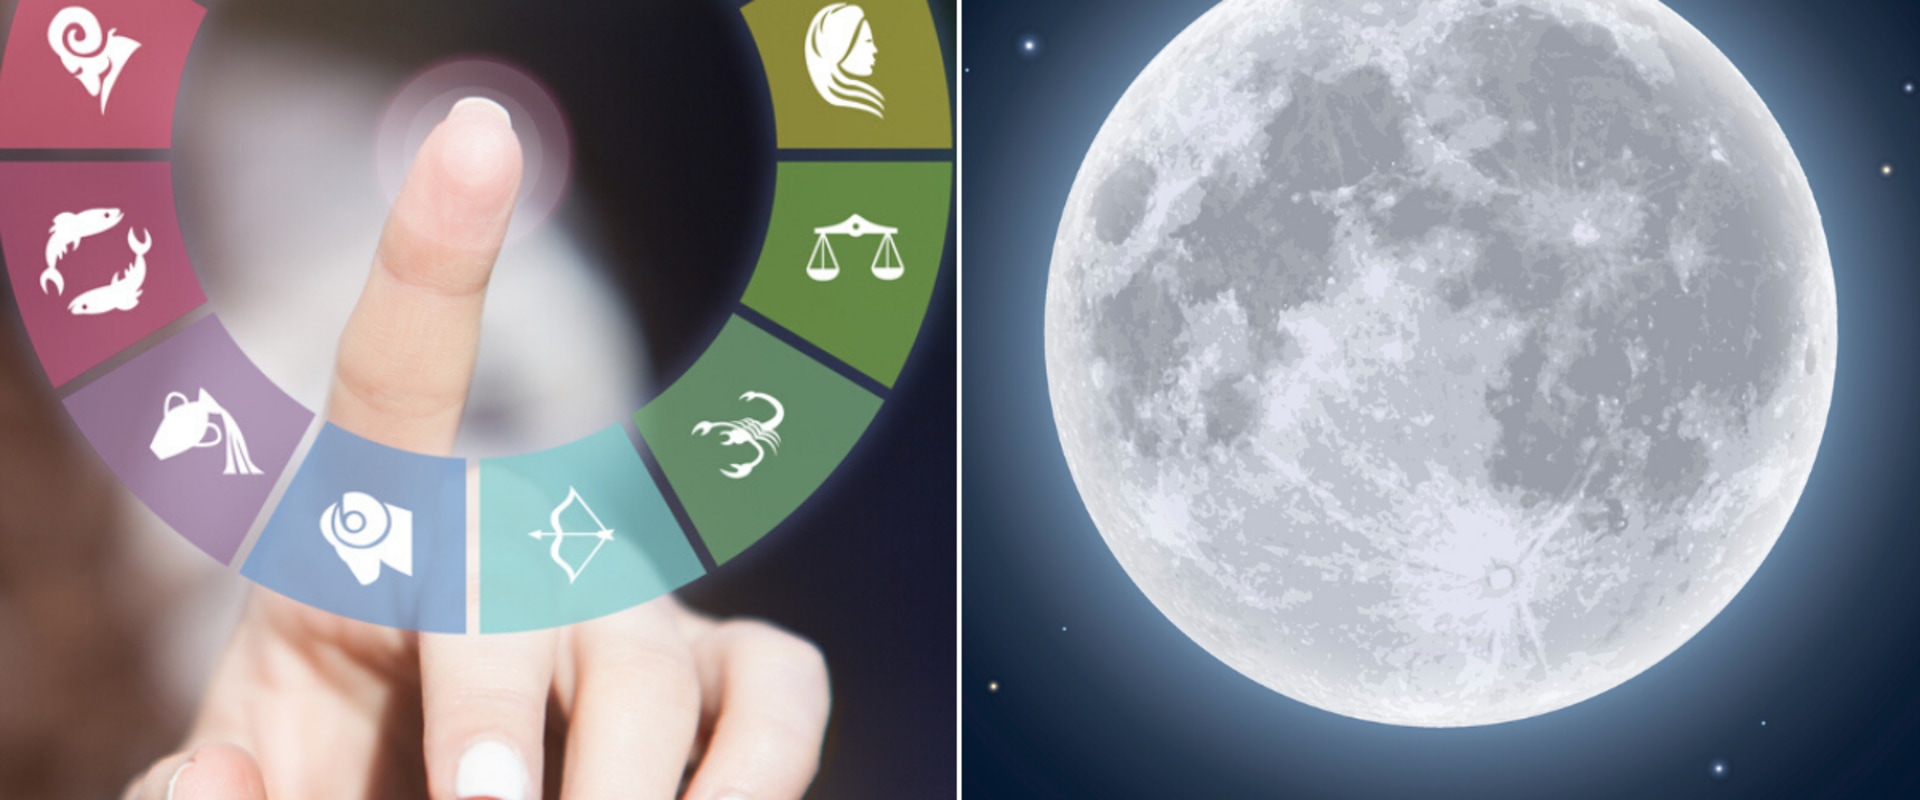 Understanding the Meaning of the Moon in Astrology